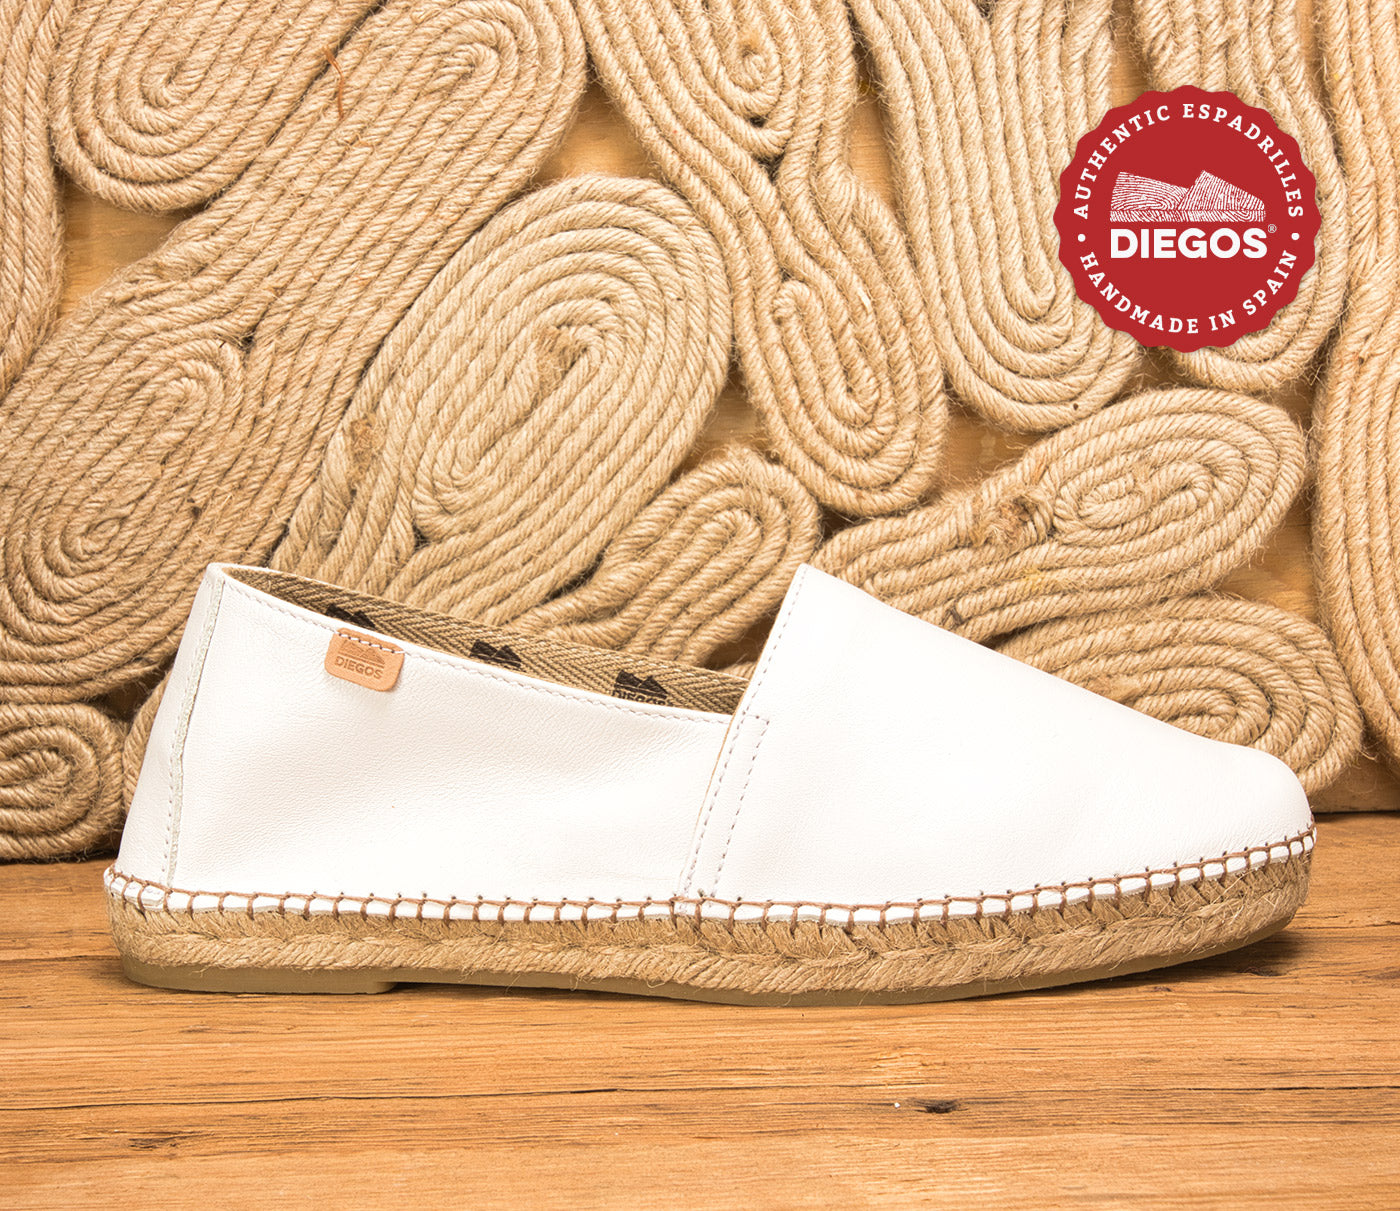 Men's White Leather Espadrilles | Spanish Traditional Shoes by Diegos EU 42 / US 8½